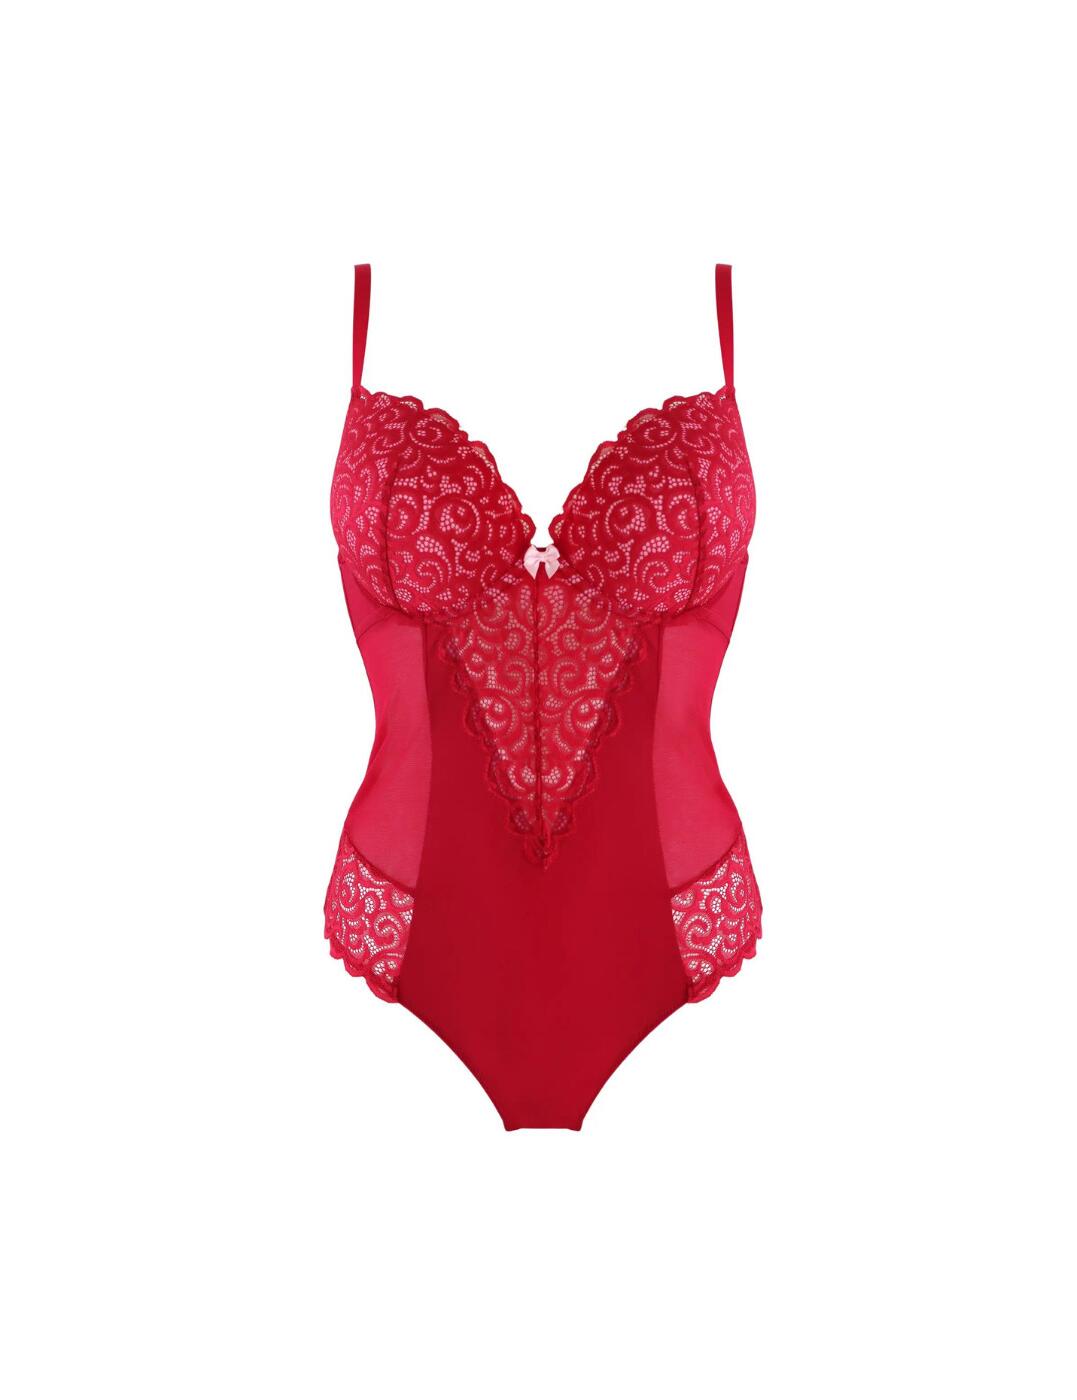 Pour Moi Romance Padded Push-Up Body Red/Pink